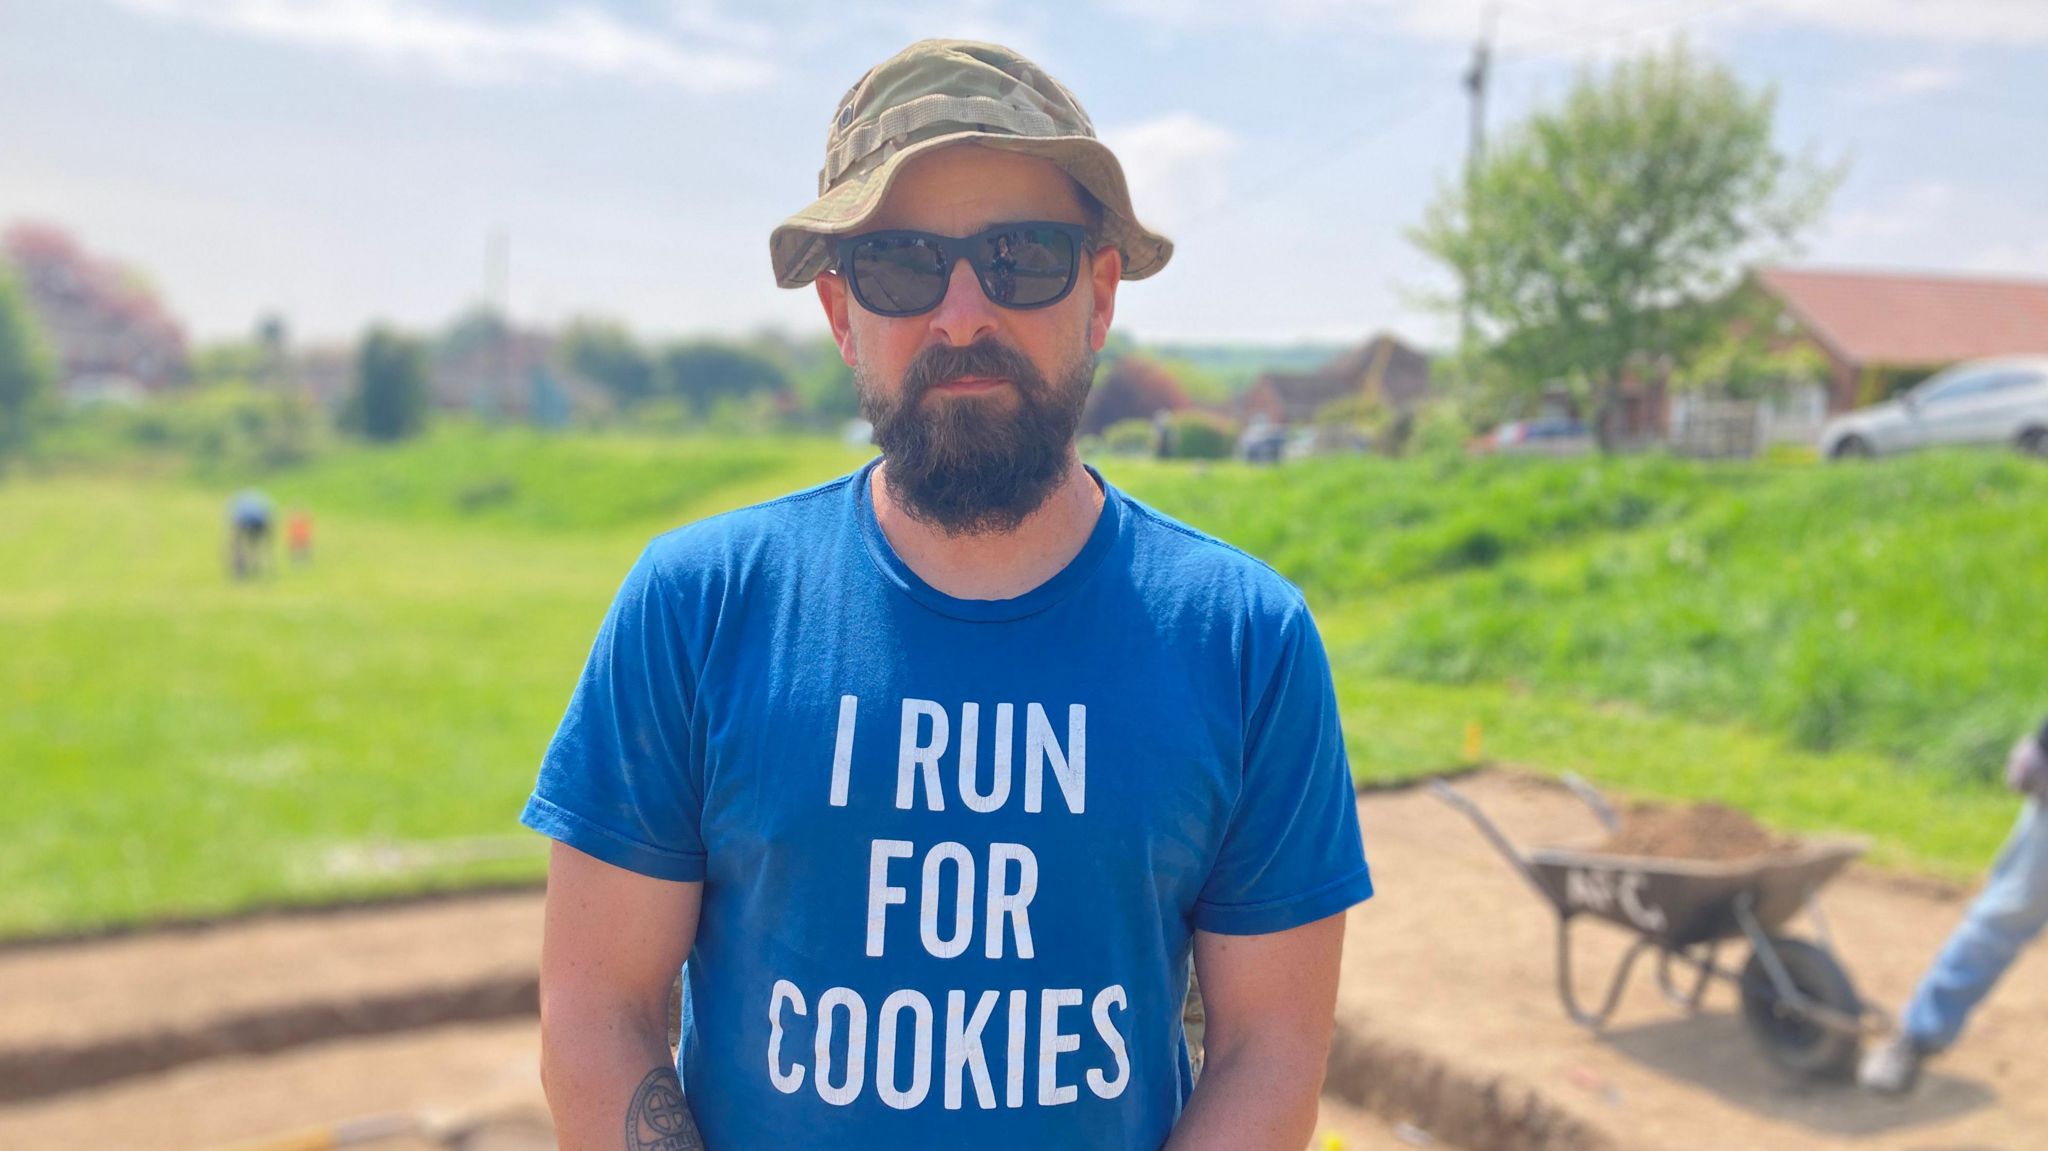 Patrick Carter looks at the camera from an archaeological dig site, wearing sunglasses, hat and a t-shirt saying 'I run for cookies'